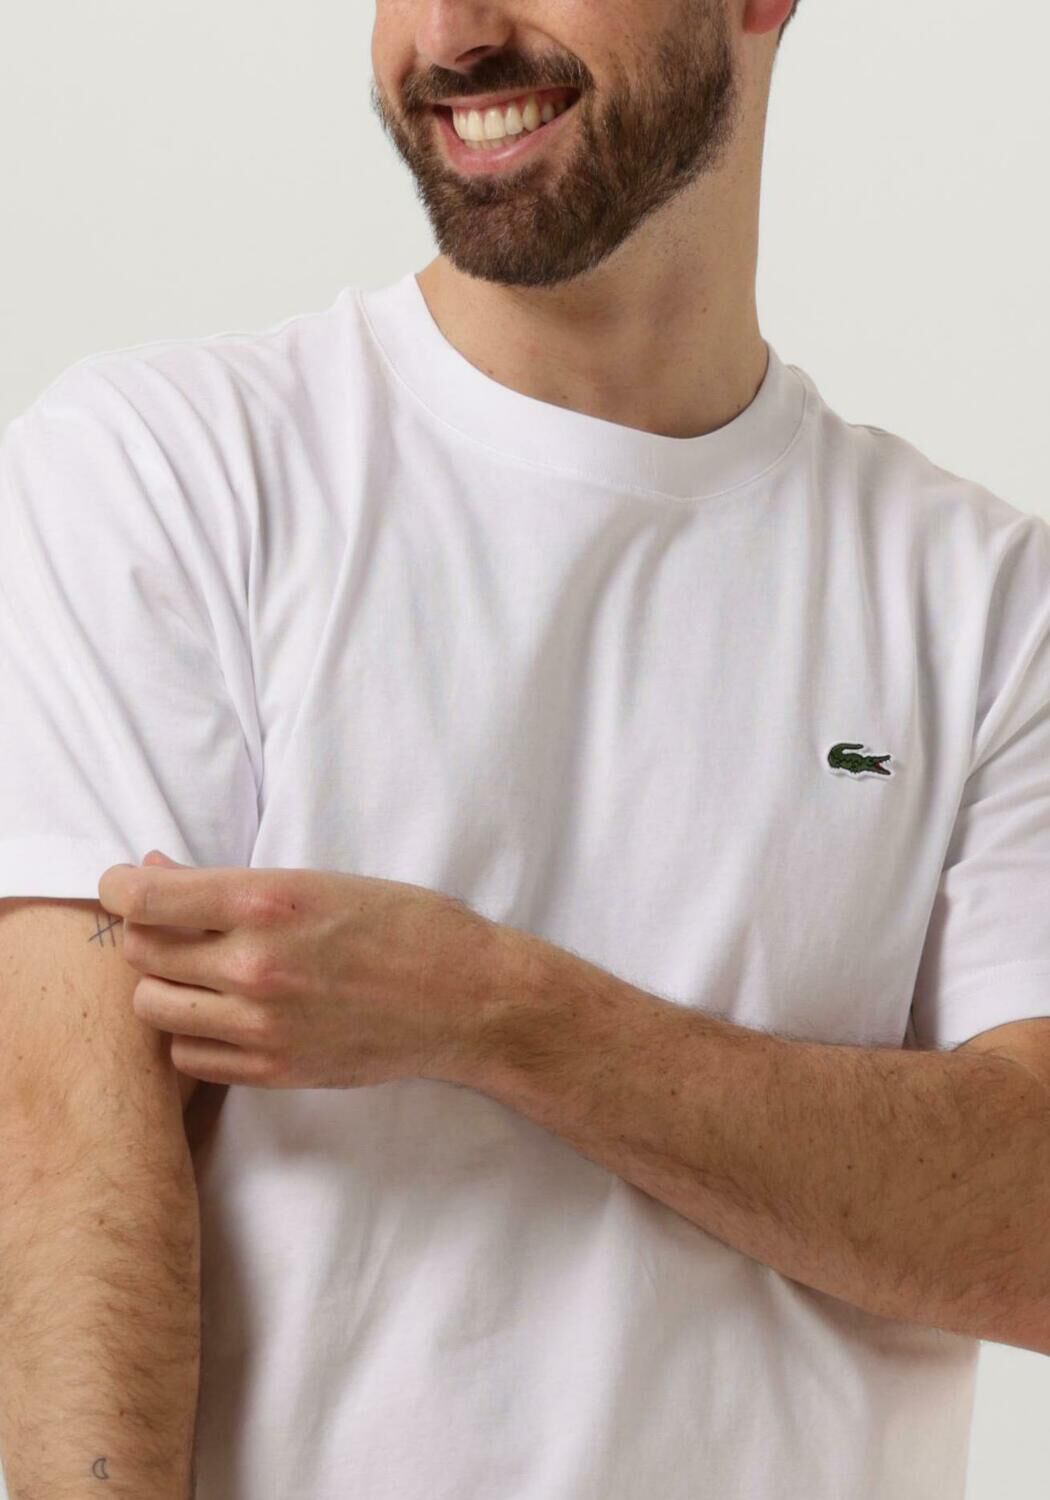 LACOSTE Heren Polo's & T-shirts 1ht1 Men's Tee-shirt Wit